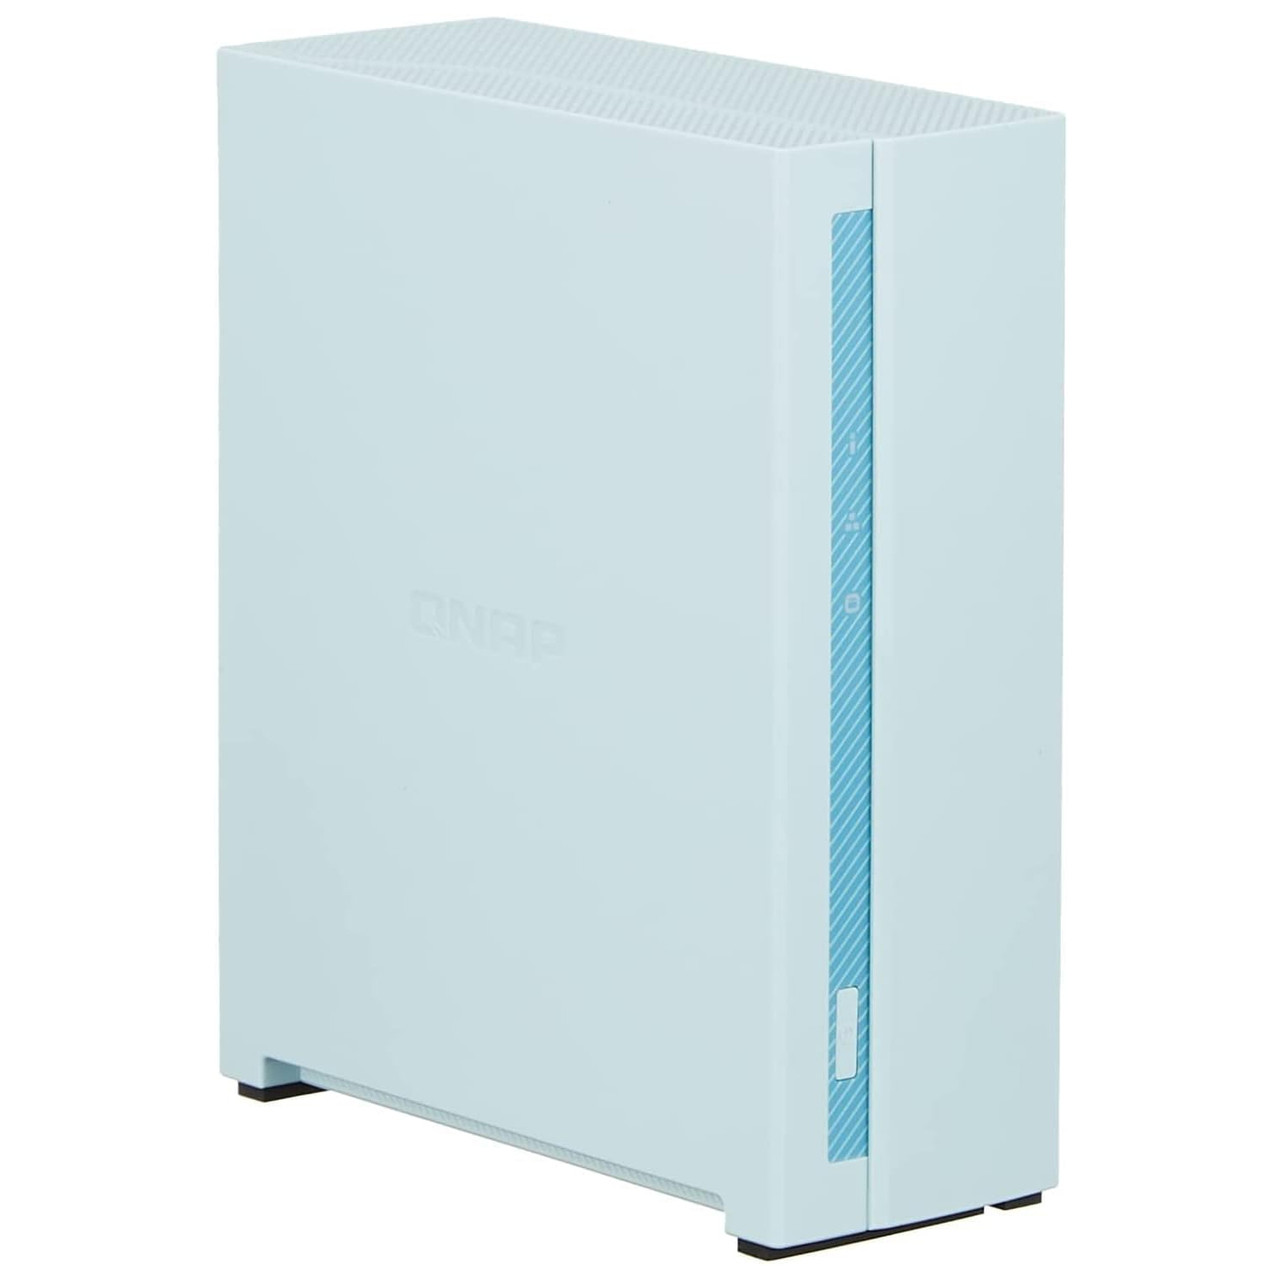 QNAP TS-130 1-Bay (16TB HDD) Home NAS, RTD1295 4-Core 1.4GHz, 1GB DDR4 w/ One 1GbE Port, Network Attached Storage